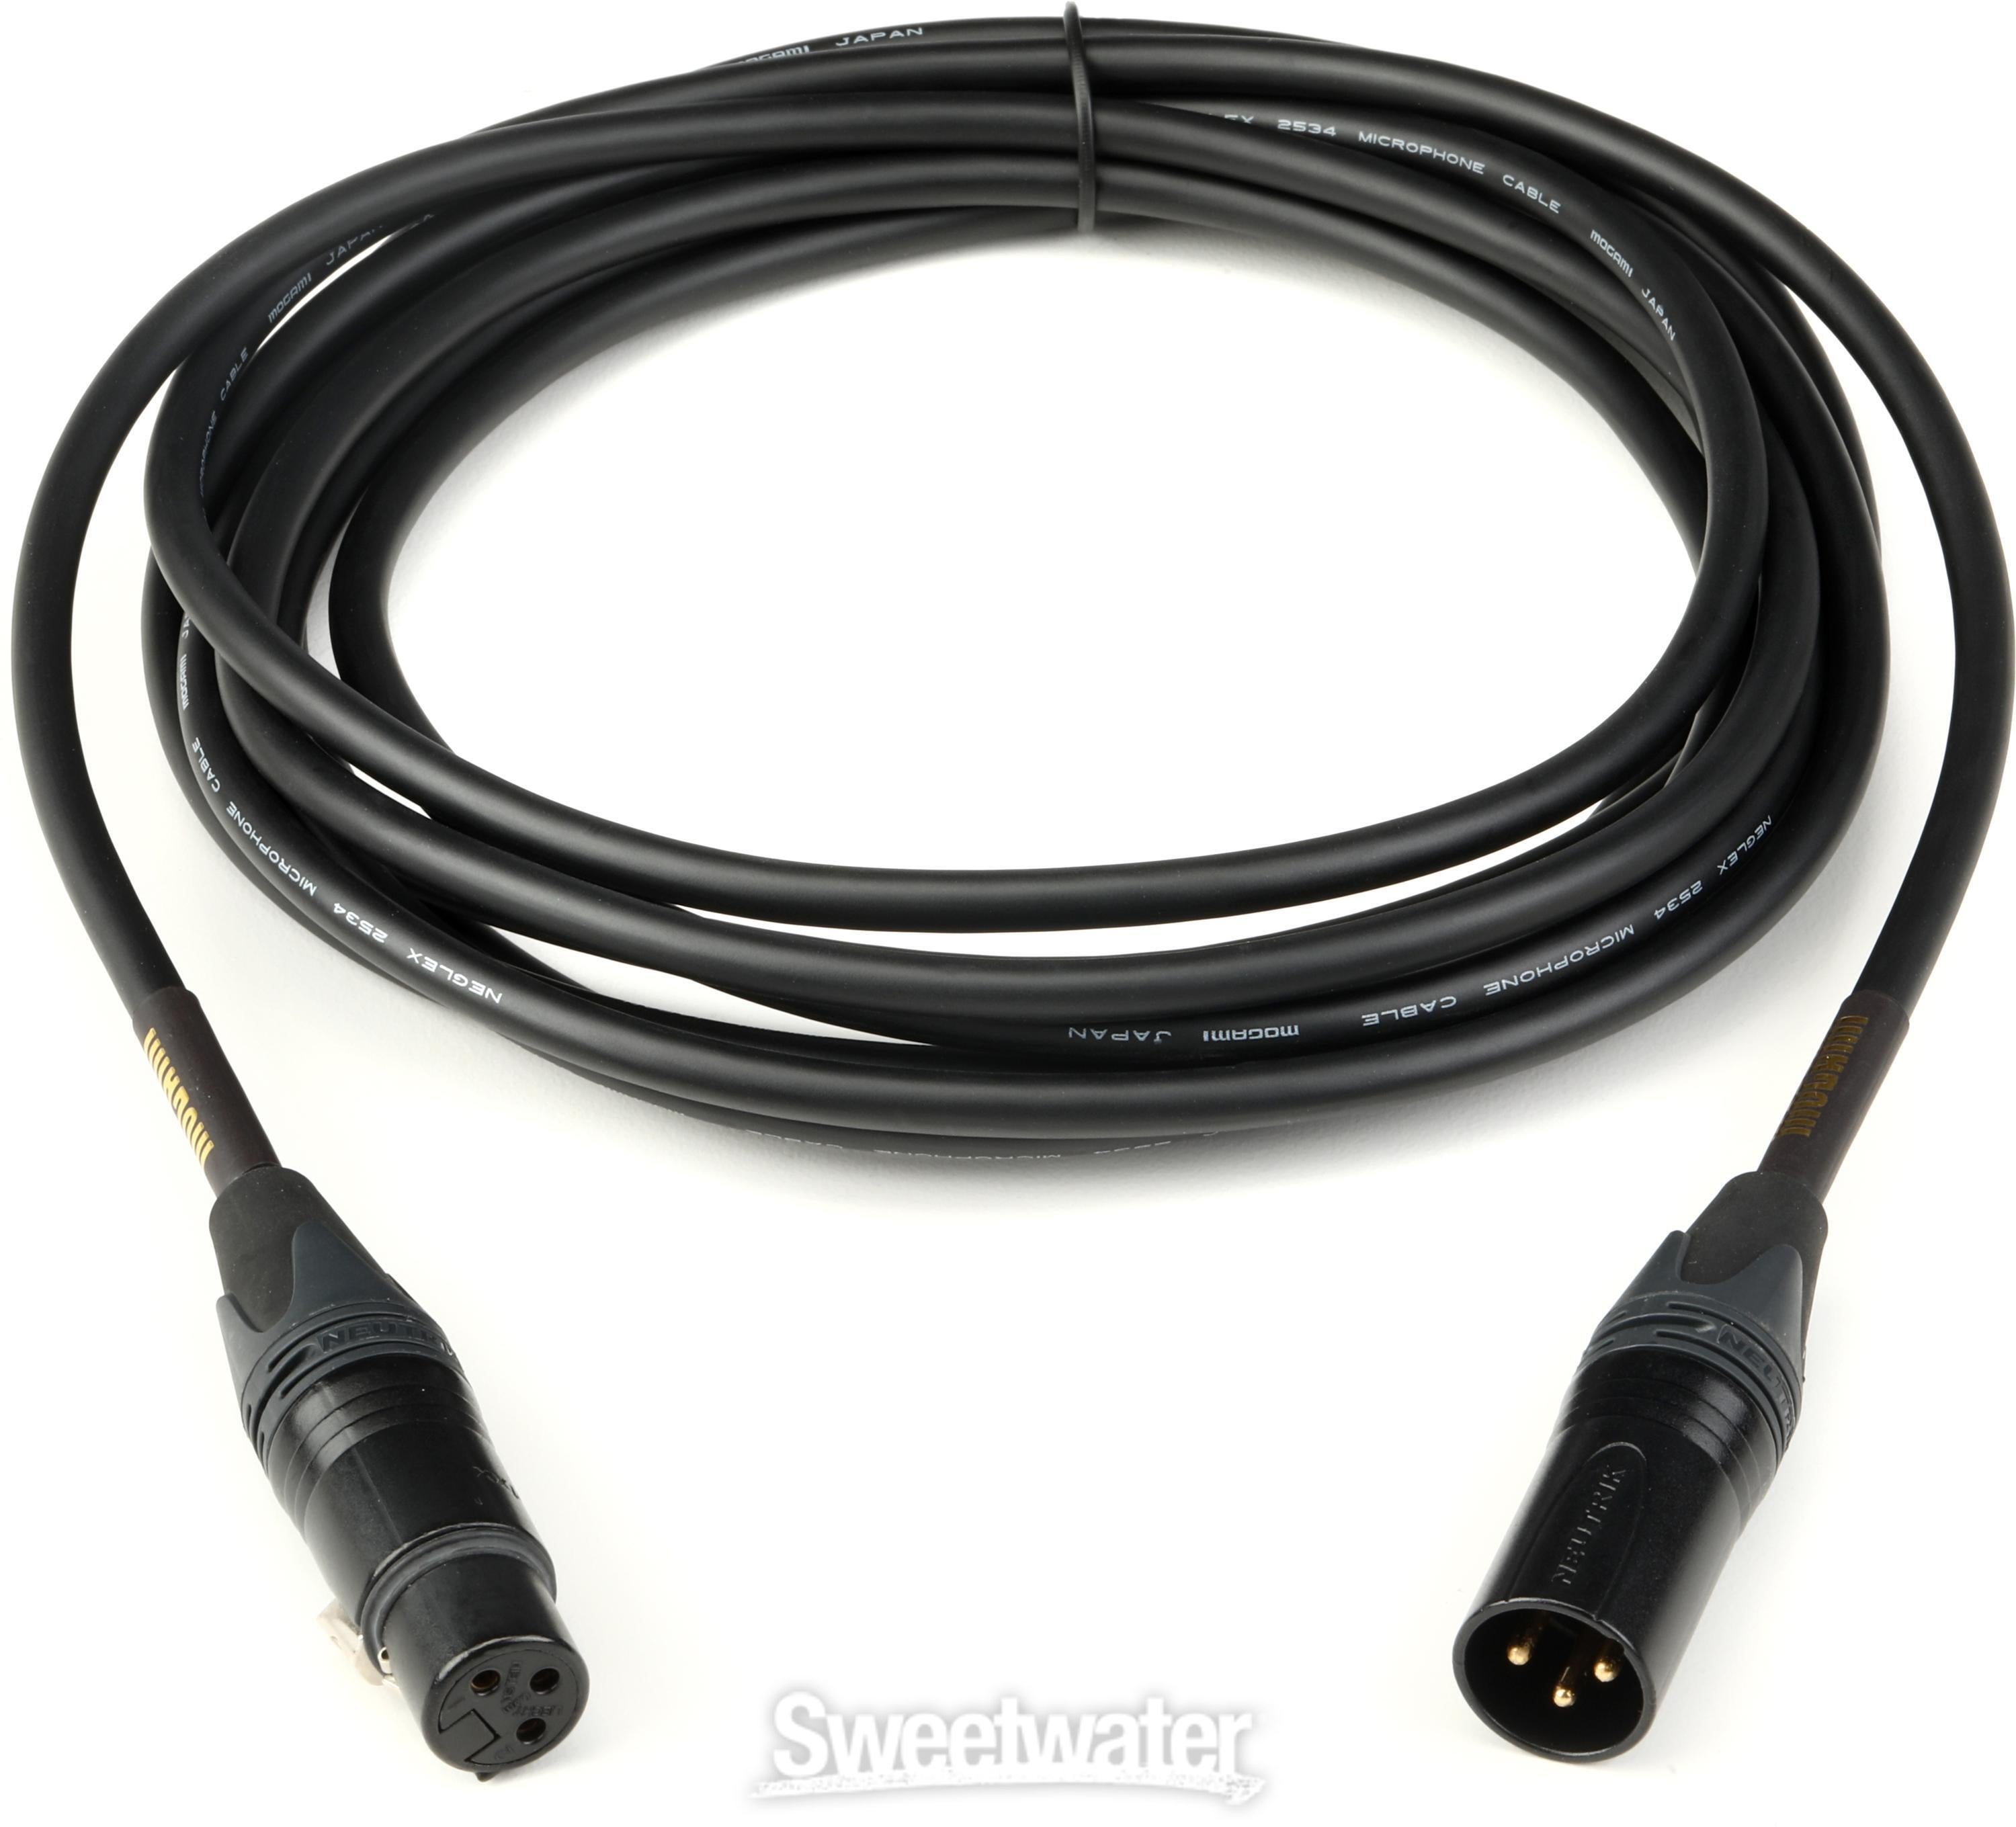 Mogami Gold Studio Microphone Cable - 15 foot | Sweetwater